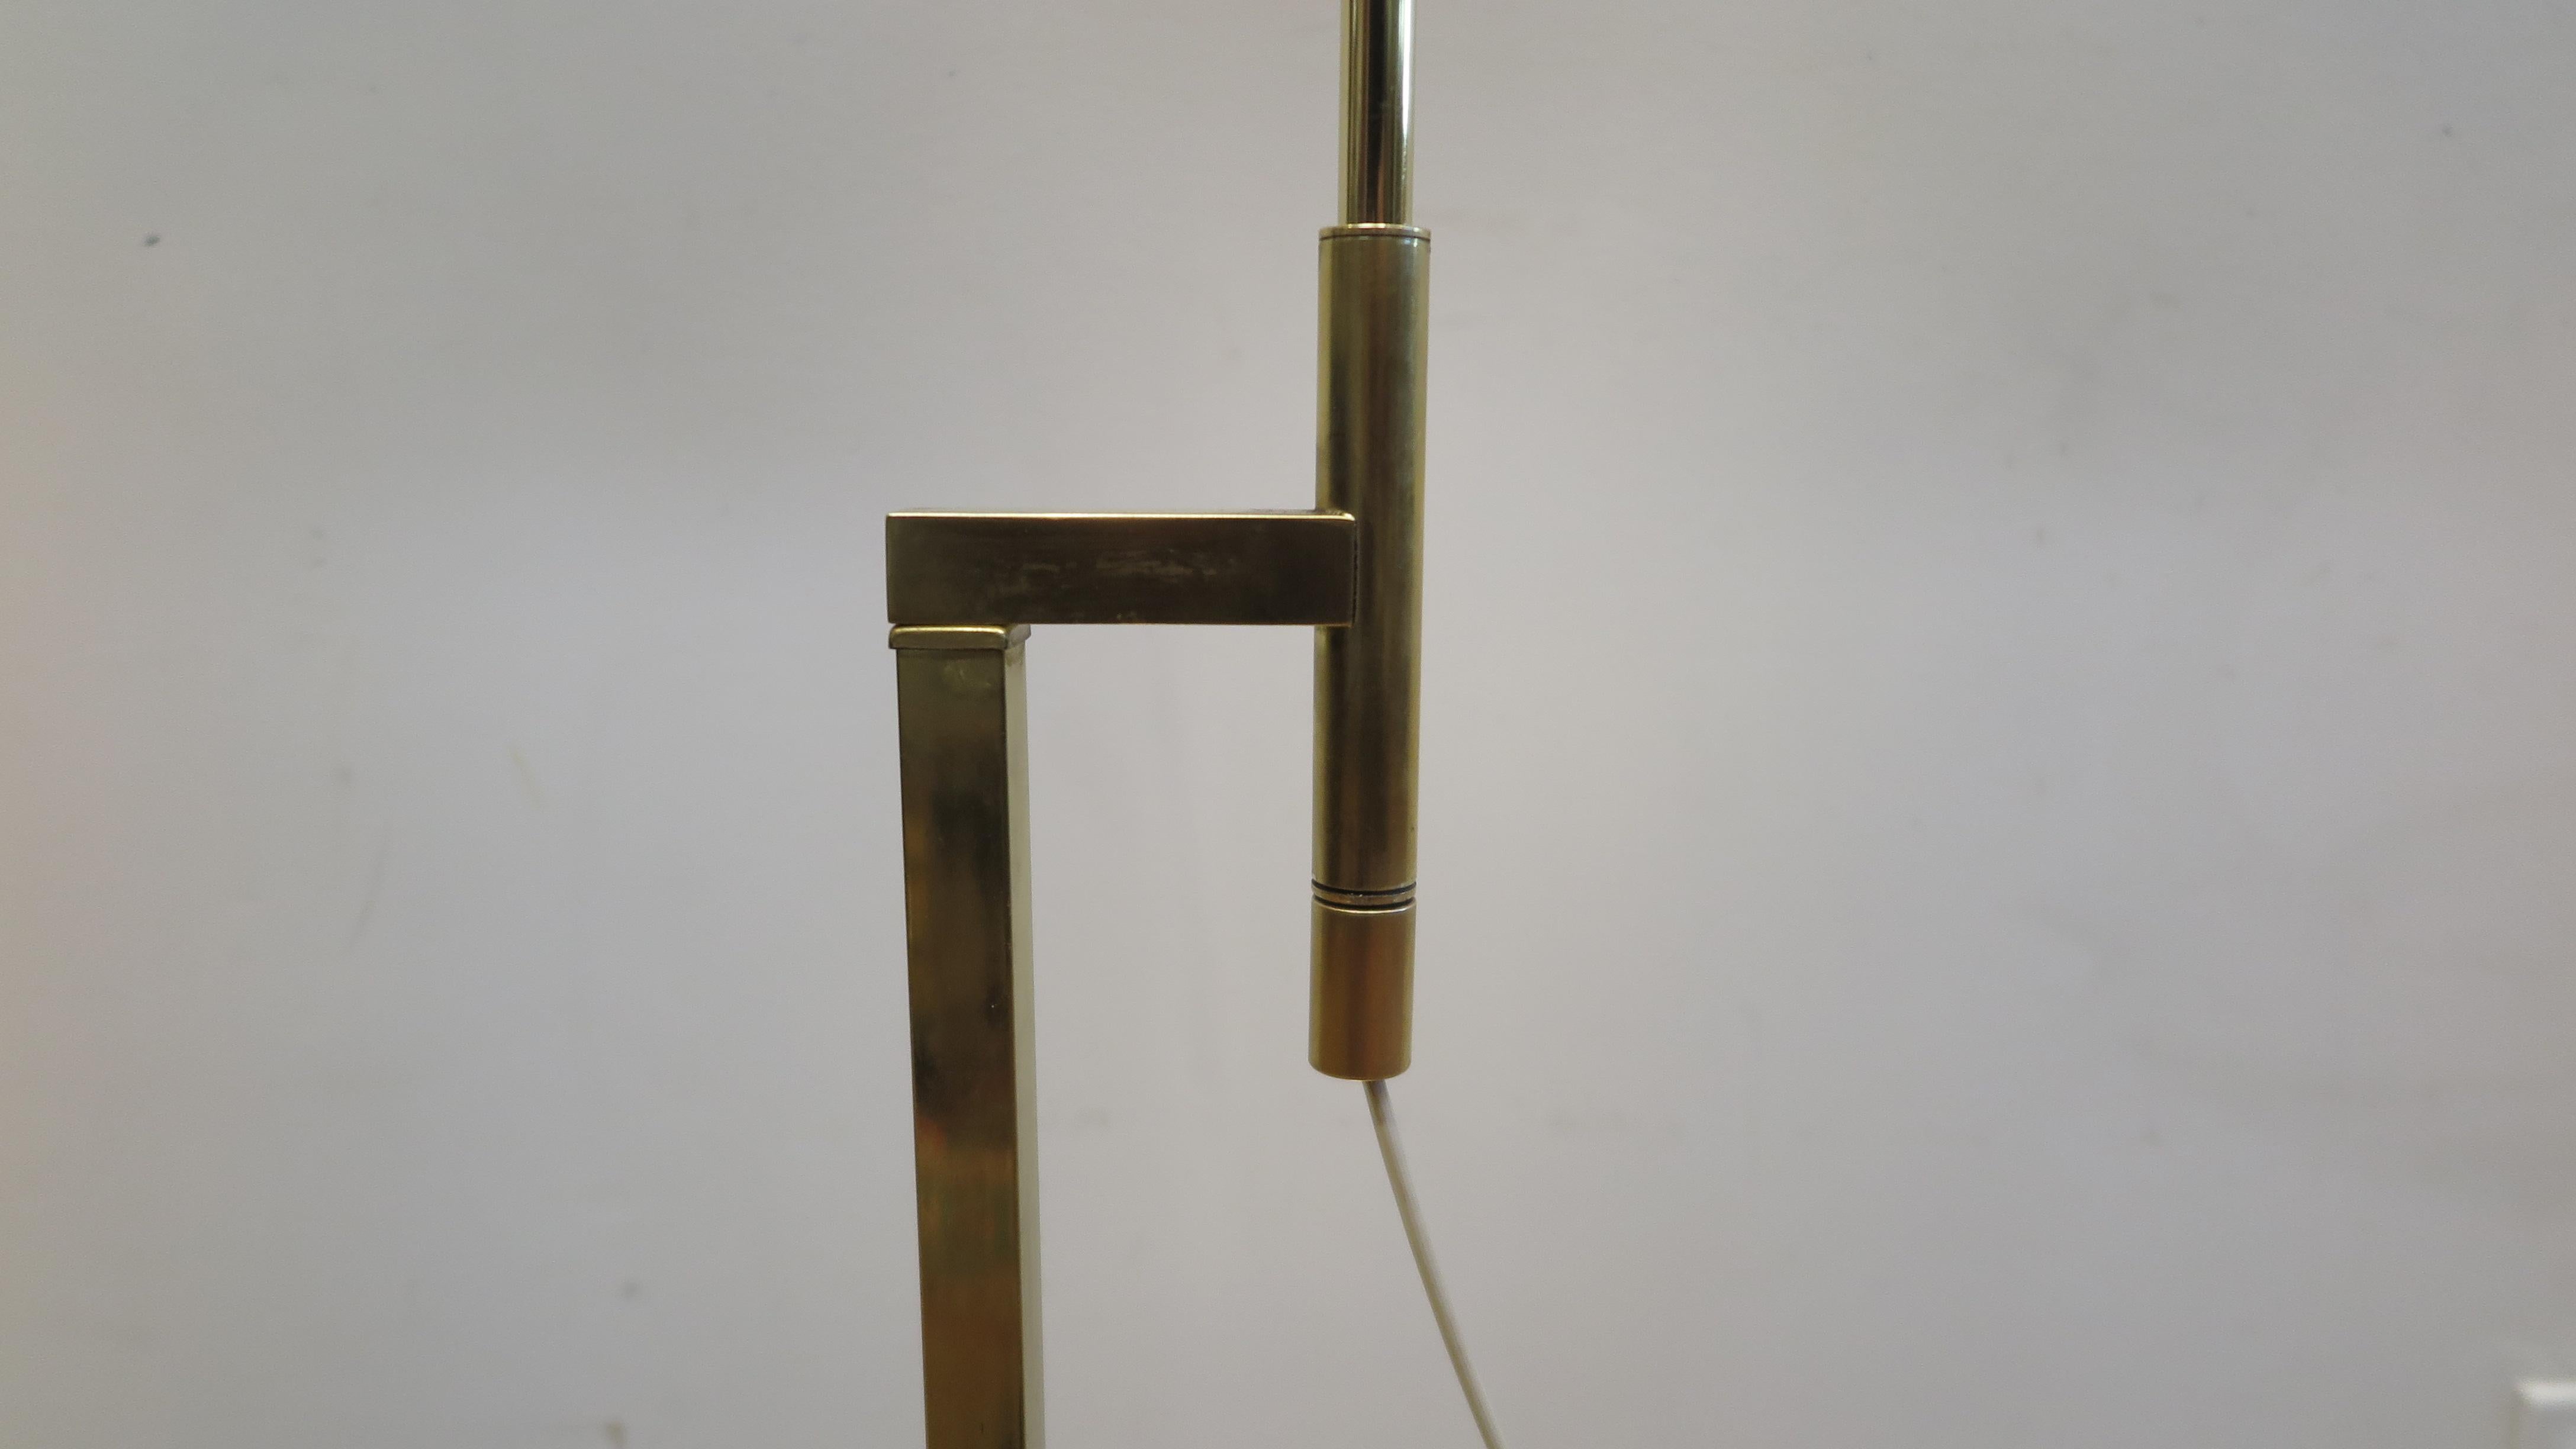 Laurel brass floor lamp adjustable height. Height can be from 43 to 65 inches. Note LED capable. Height is adjusted by sliding the pole up or down. This lamp is in good condition. Some oxidation to the base. 
1960-1970, American Laurel Lamp Company.